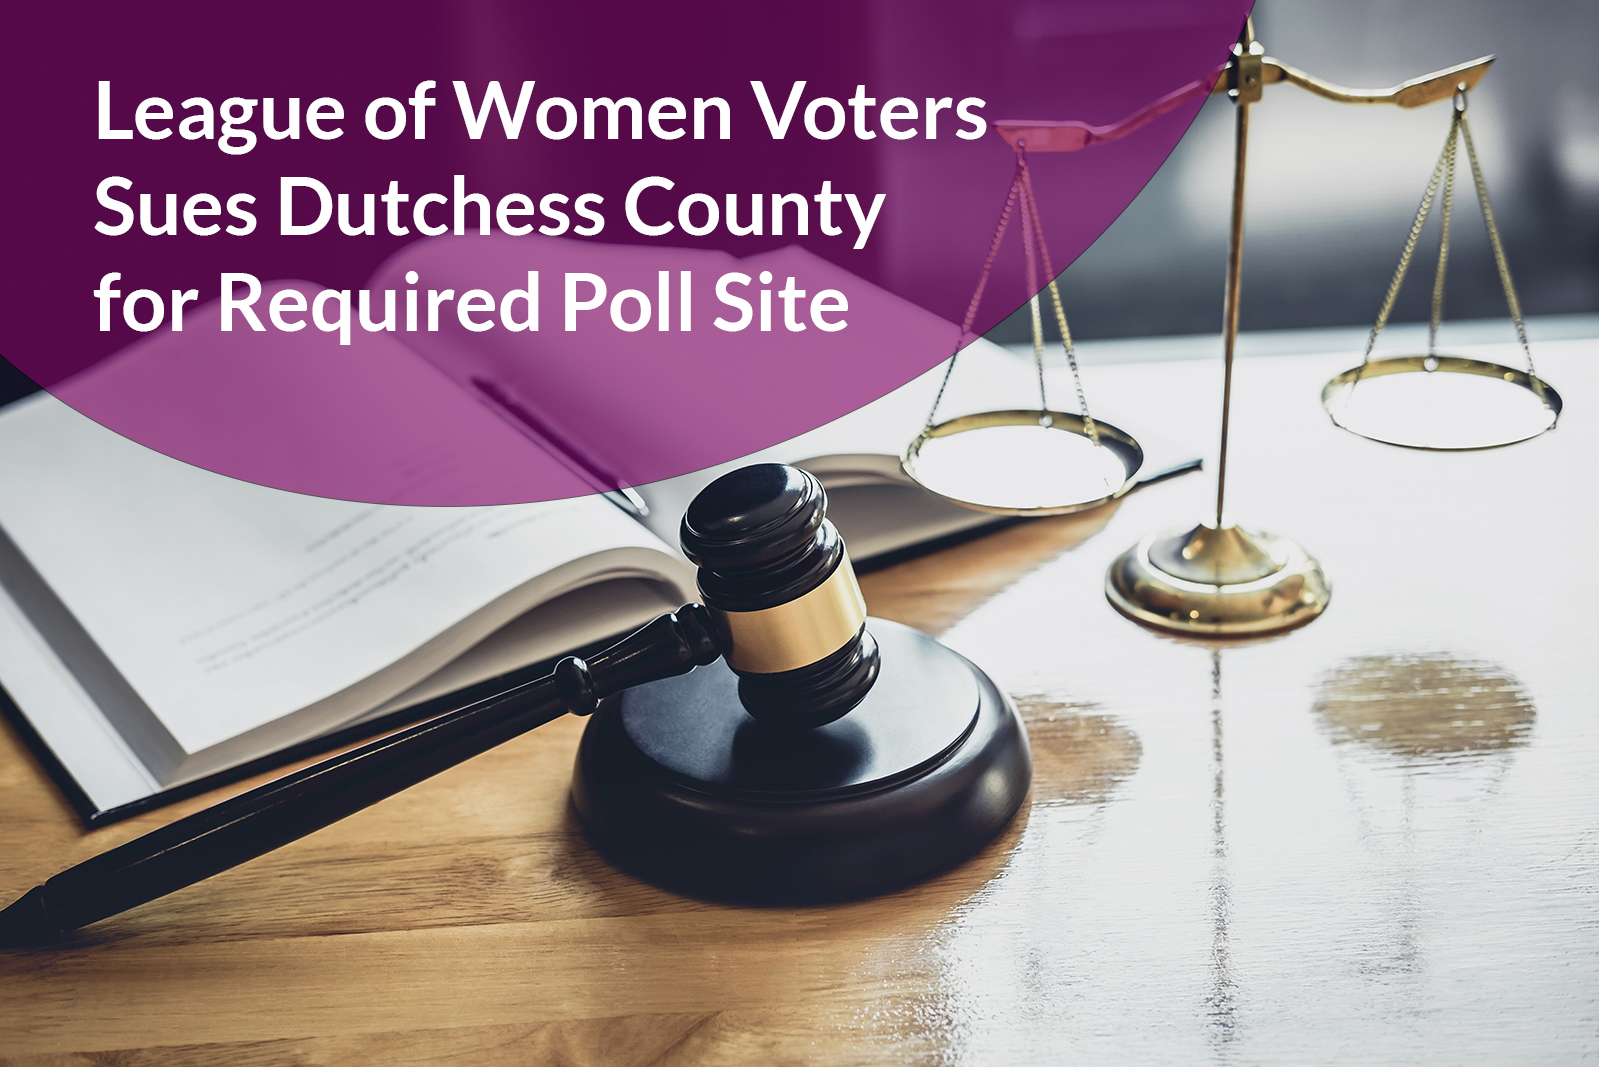 LEAGUE OF WOMEN VOTERS SUES DUTCHESS COUNTY FOR REQUIRED POLL SITE